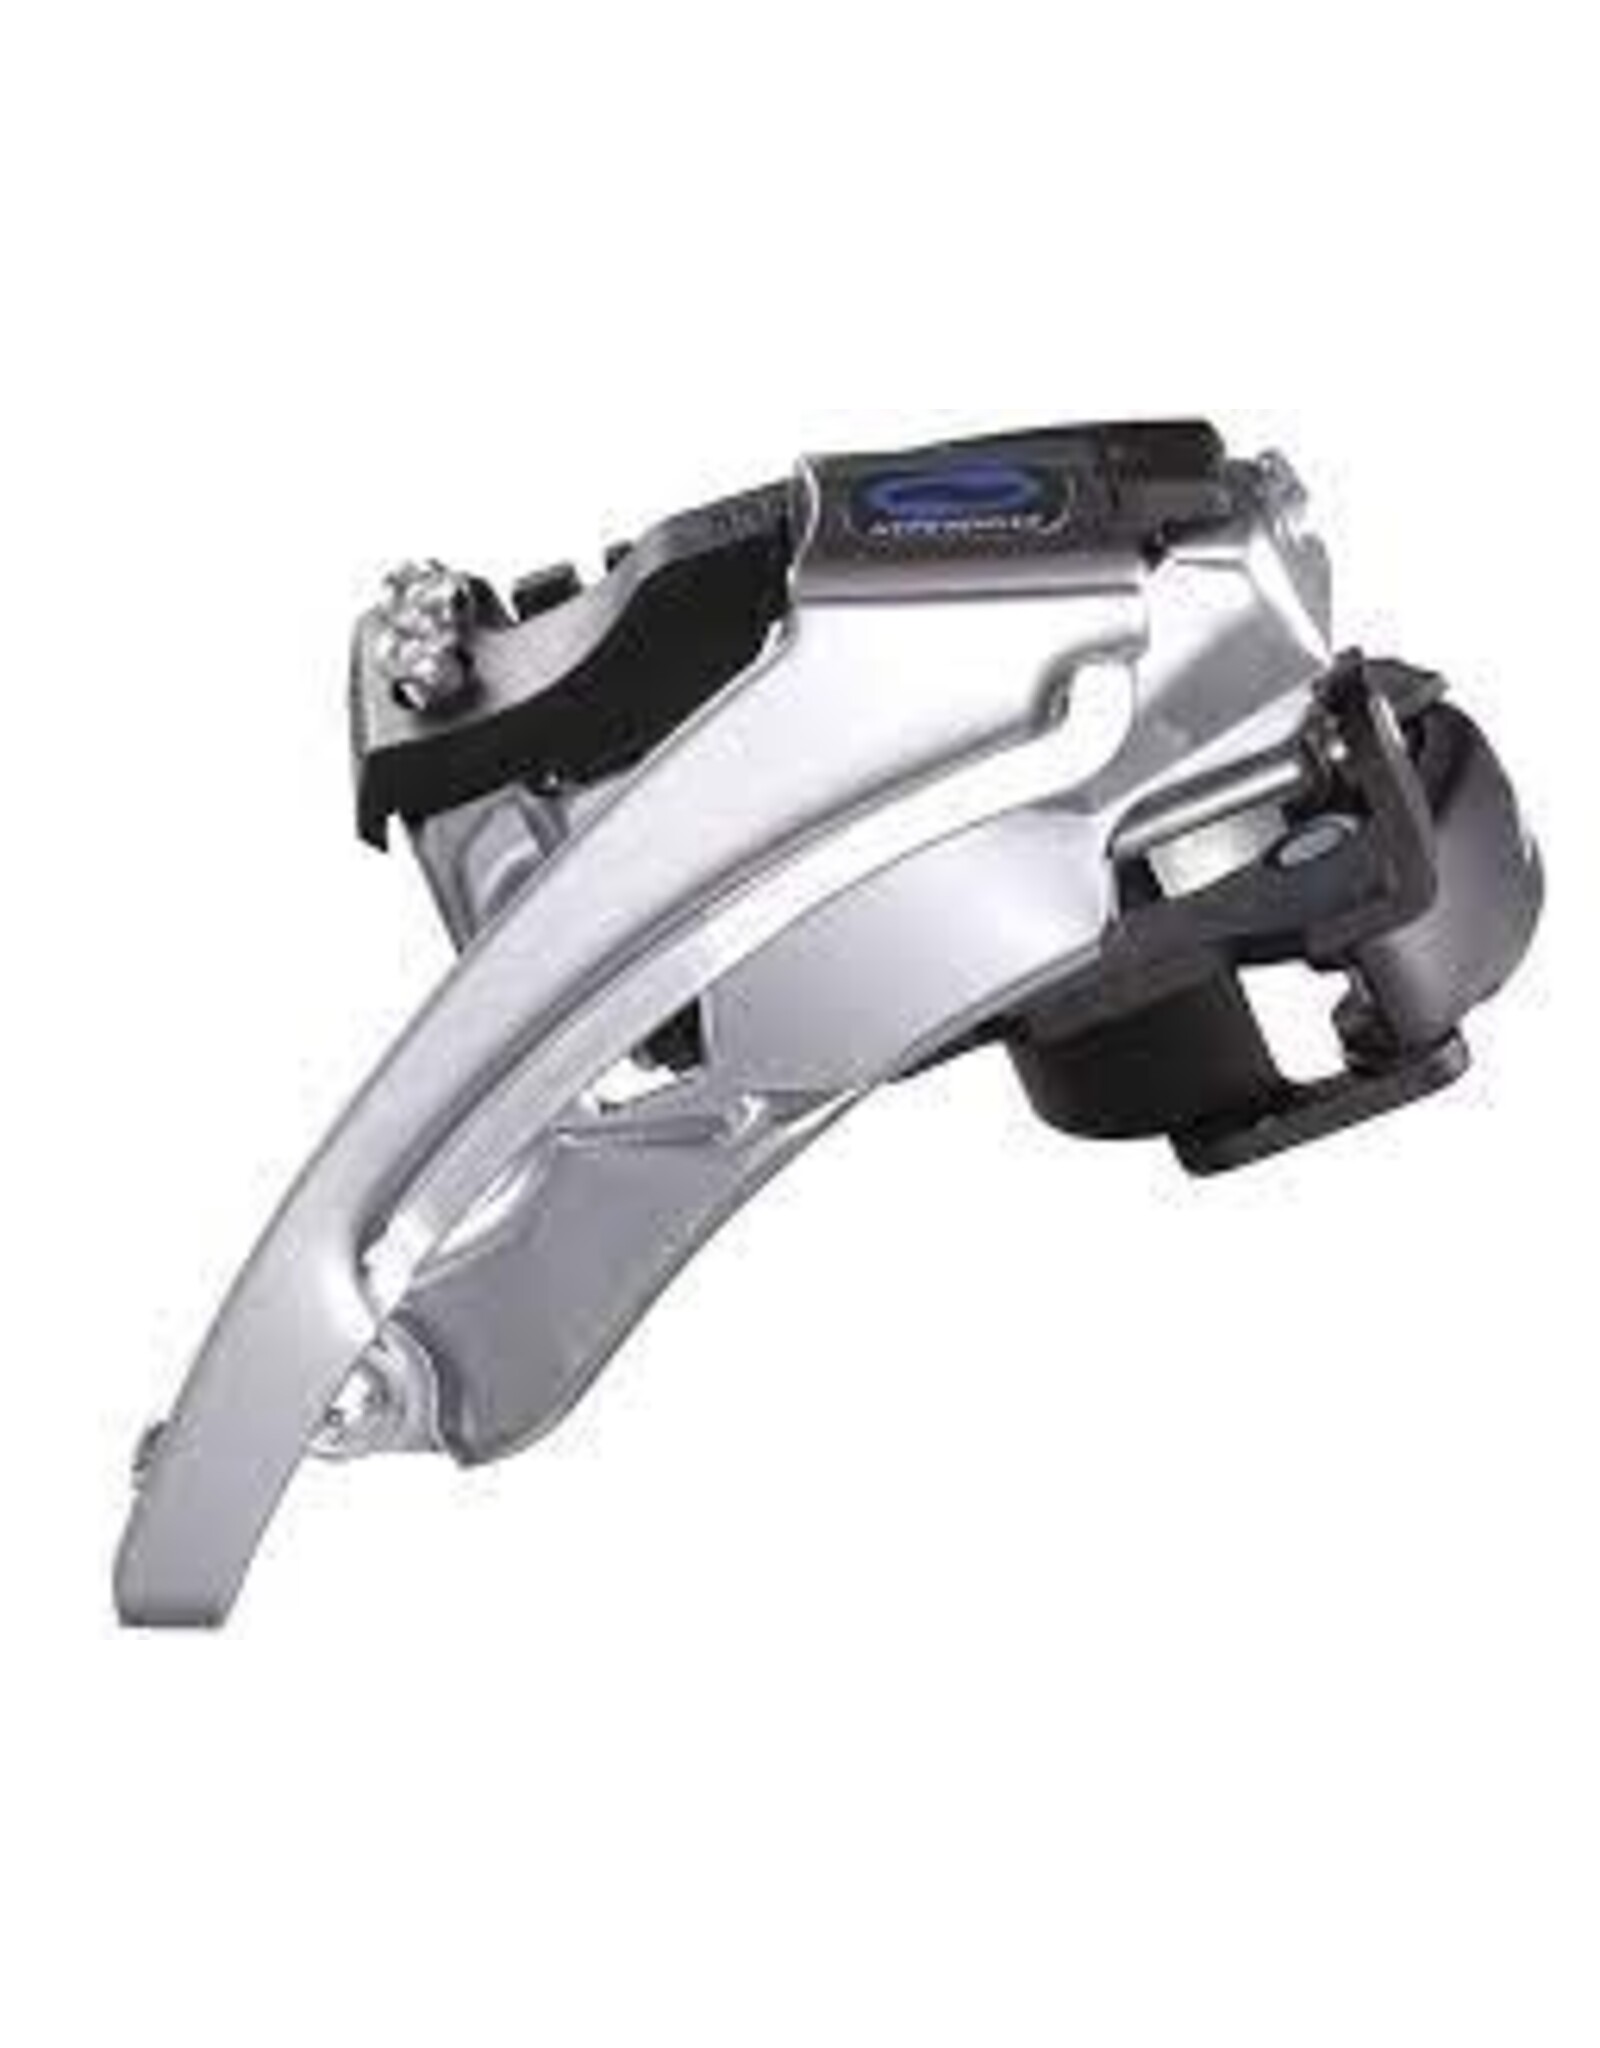 Shimano FRONT DERAILLEUR SHIMANO, FD-M2000, ALTUS, TOP-SWING DUAL-PULL, FOR 3X9, BAND TYPE 34.9MM(W/31.8 & 28.6MM ADPT), FOR 40T TOP, CS-ANGLE:63-66, CL:50MM